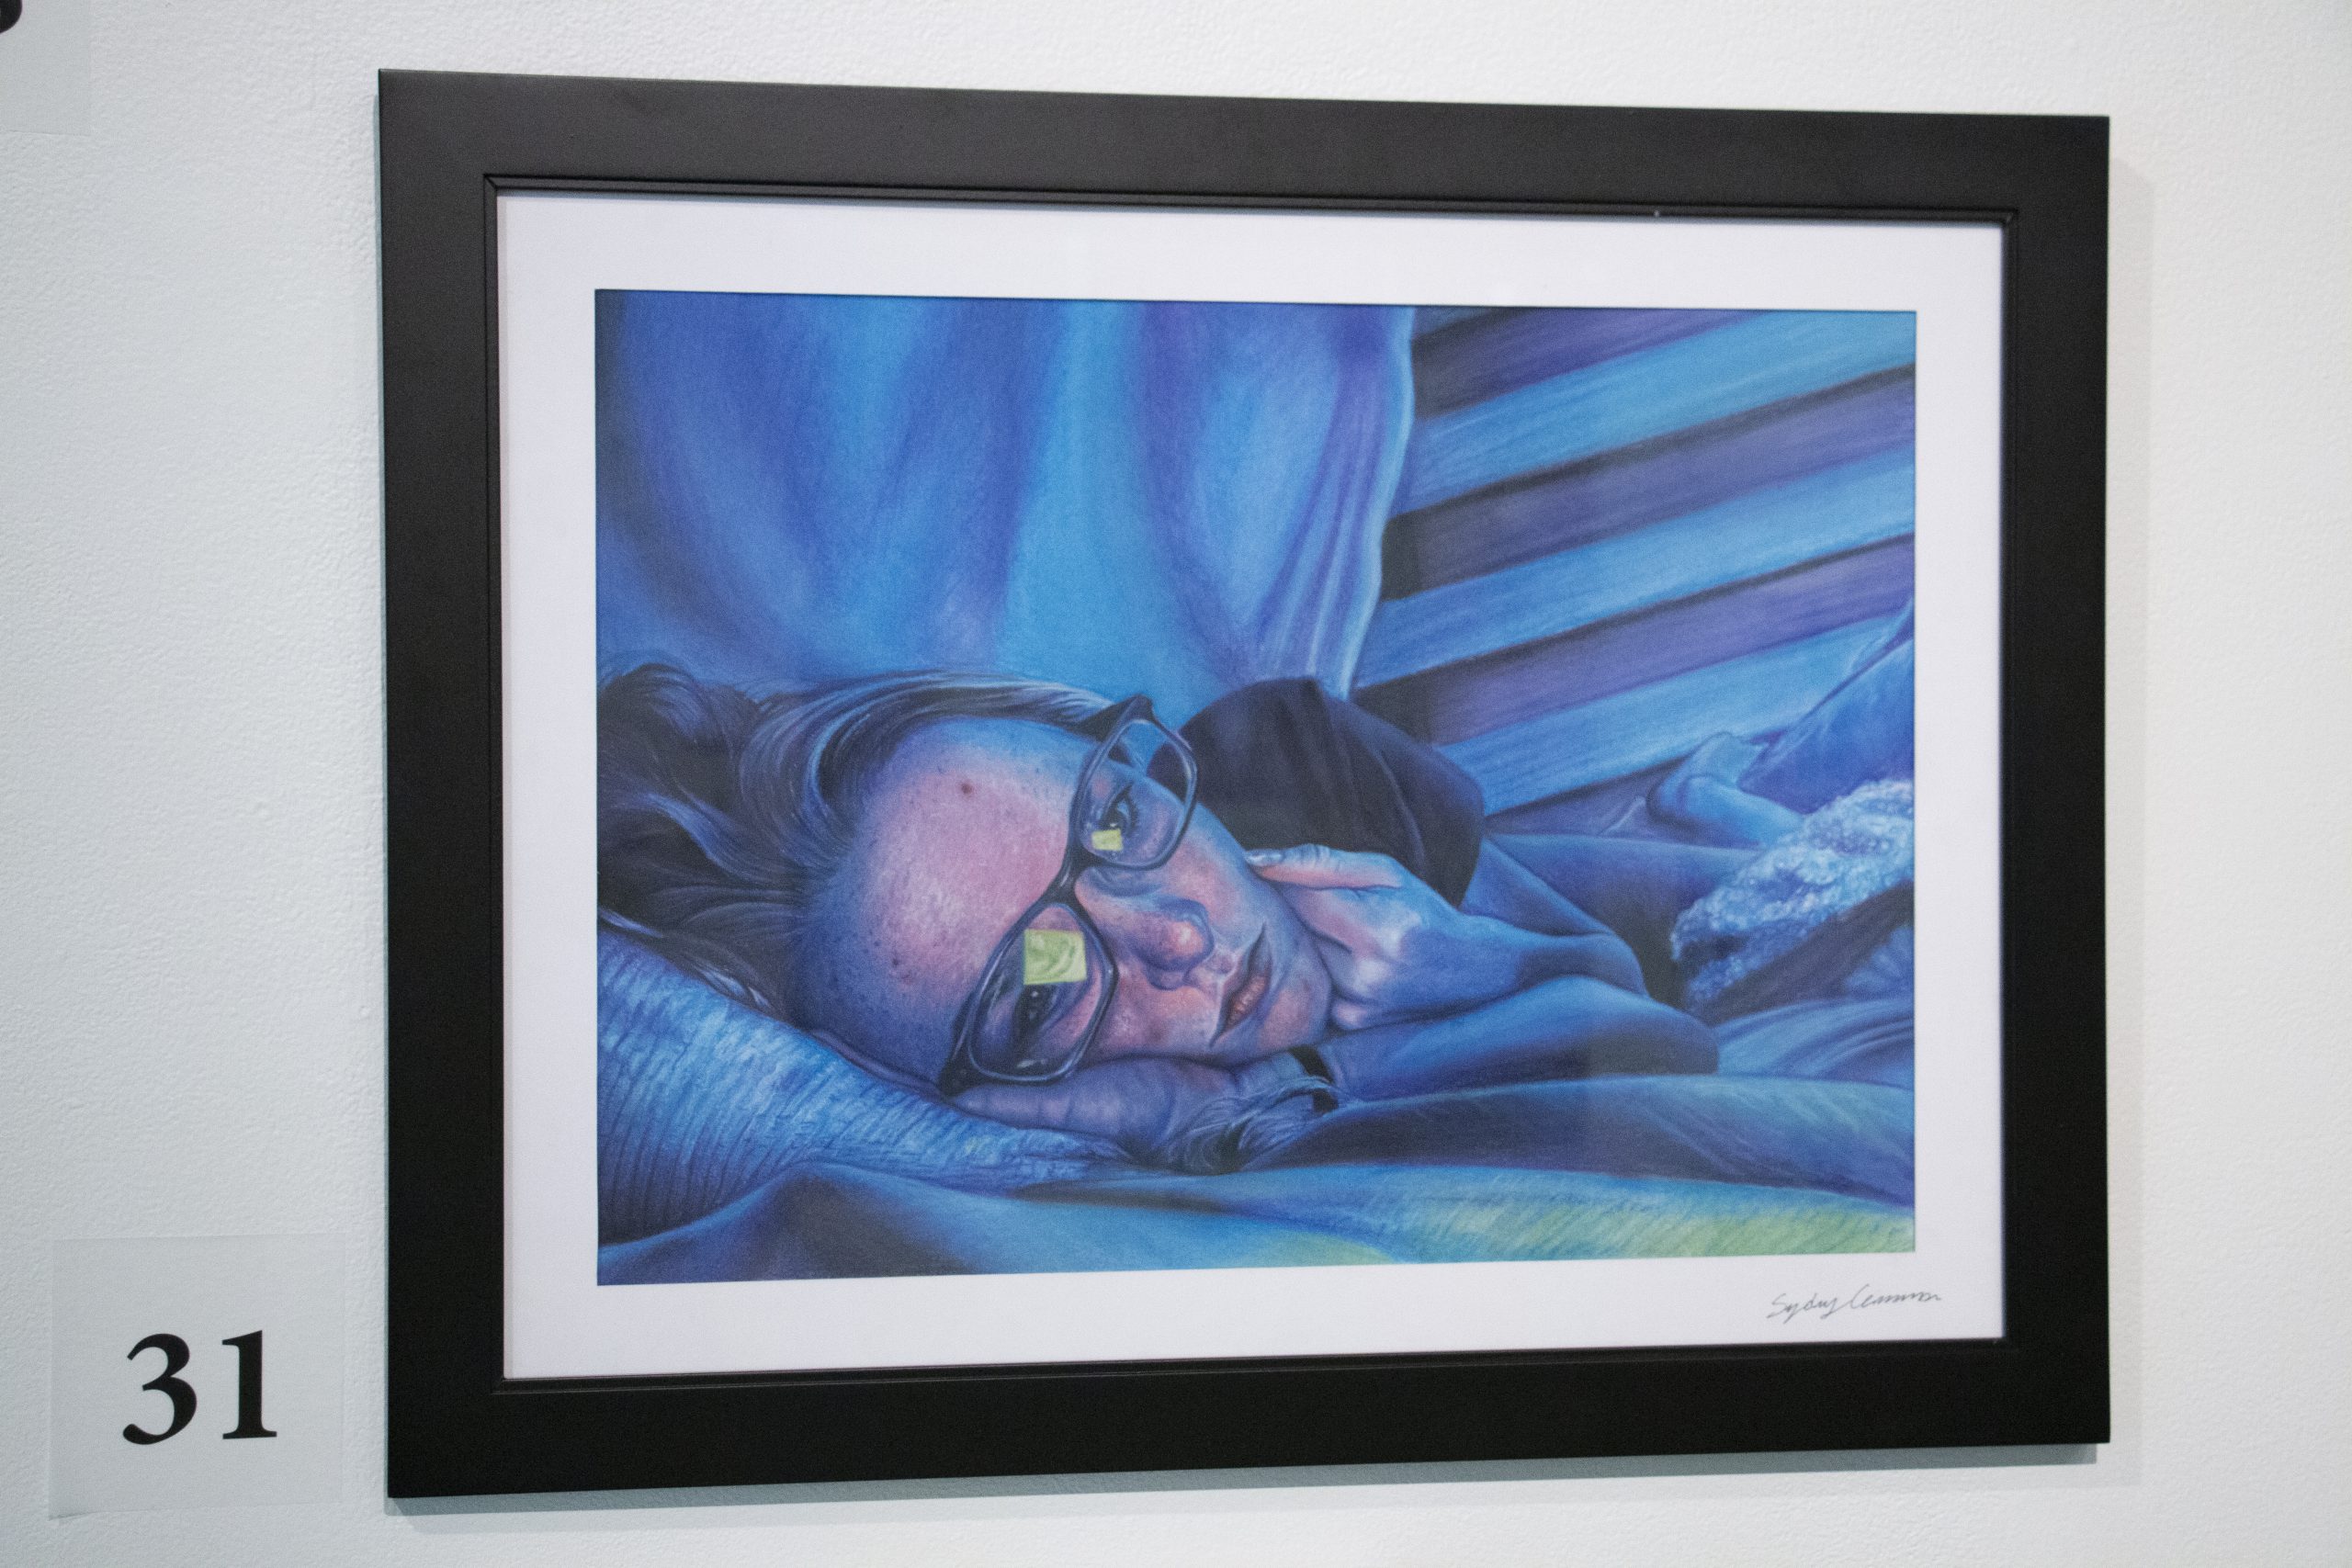 A woman lies on her side in a bed. A reflection in her glasses suggests she is looking at a glowing screen. The entire scene is tinted with a blue glow suggesting that there is no natural light in this photo. Her expression appears lethargic or melancholy.